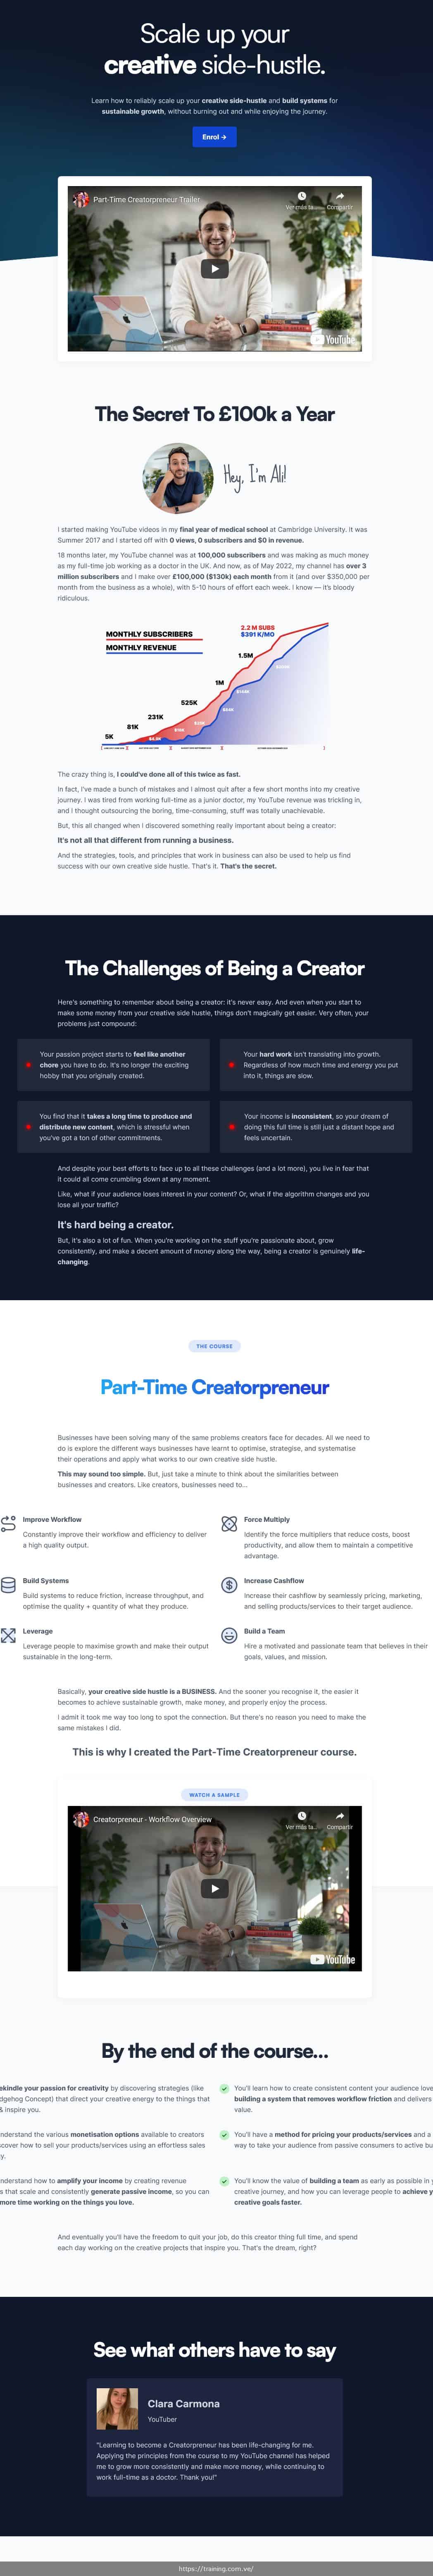 Part-Time Creatorpreneur by Ali Abdaal Coupon Discount Free